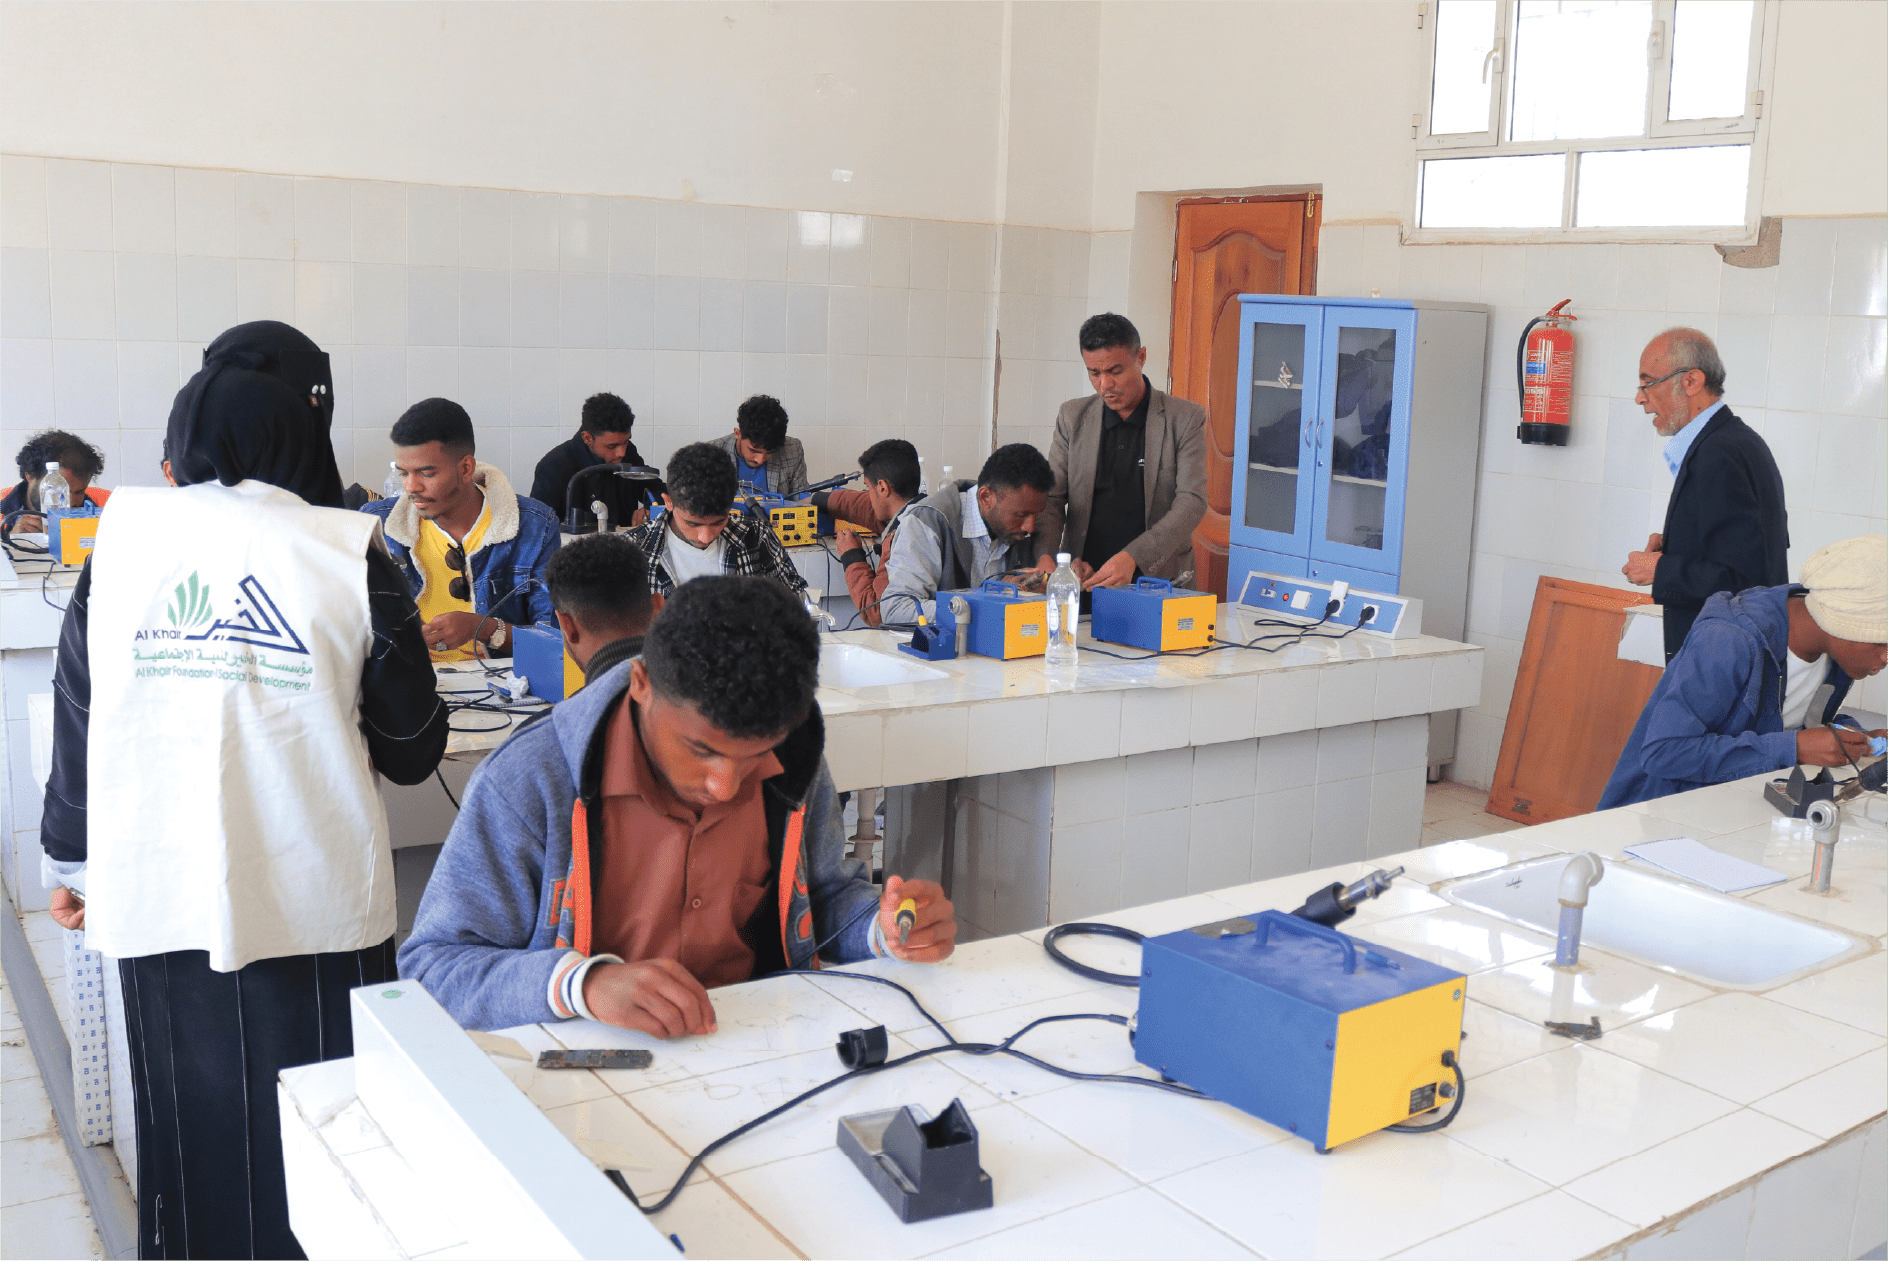 The implementation of vocational training activities in sewing and mobile maintenance has started within the project to improve the income of Bilal's grandchildren's families